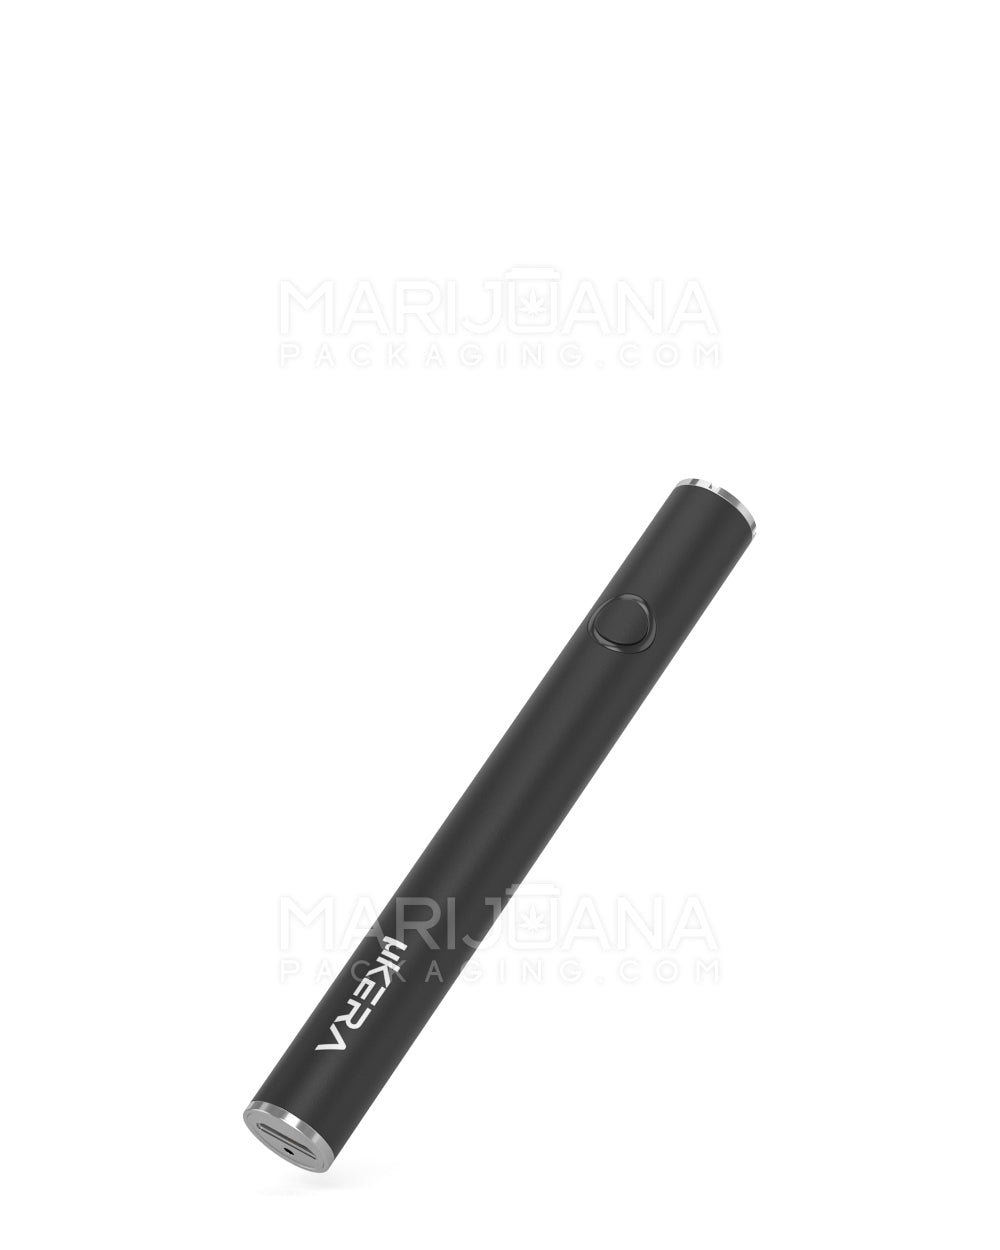 RAE | Variable Voltage Soft Touch Vape Battery | 320mAh - Black - 640 Count - 4